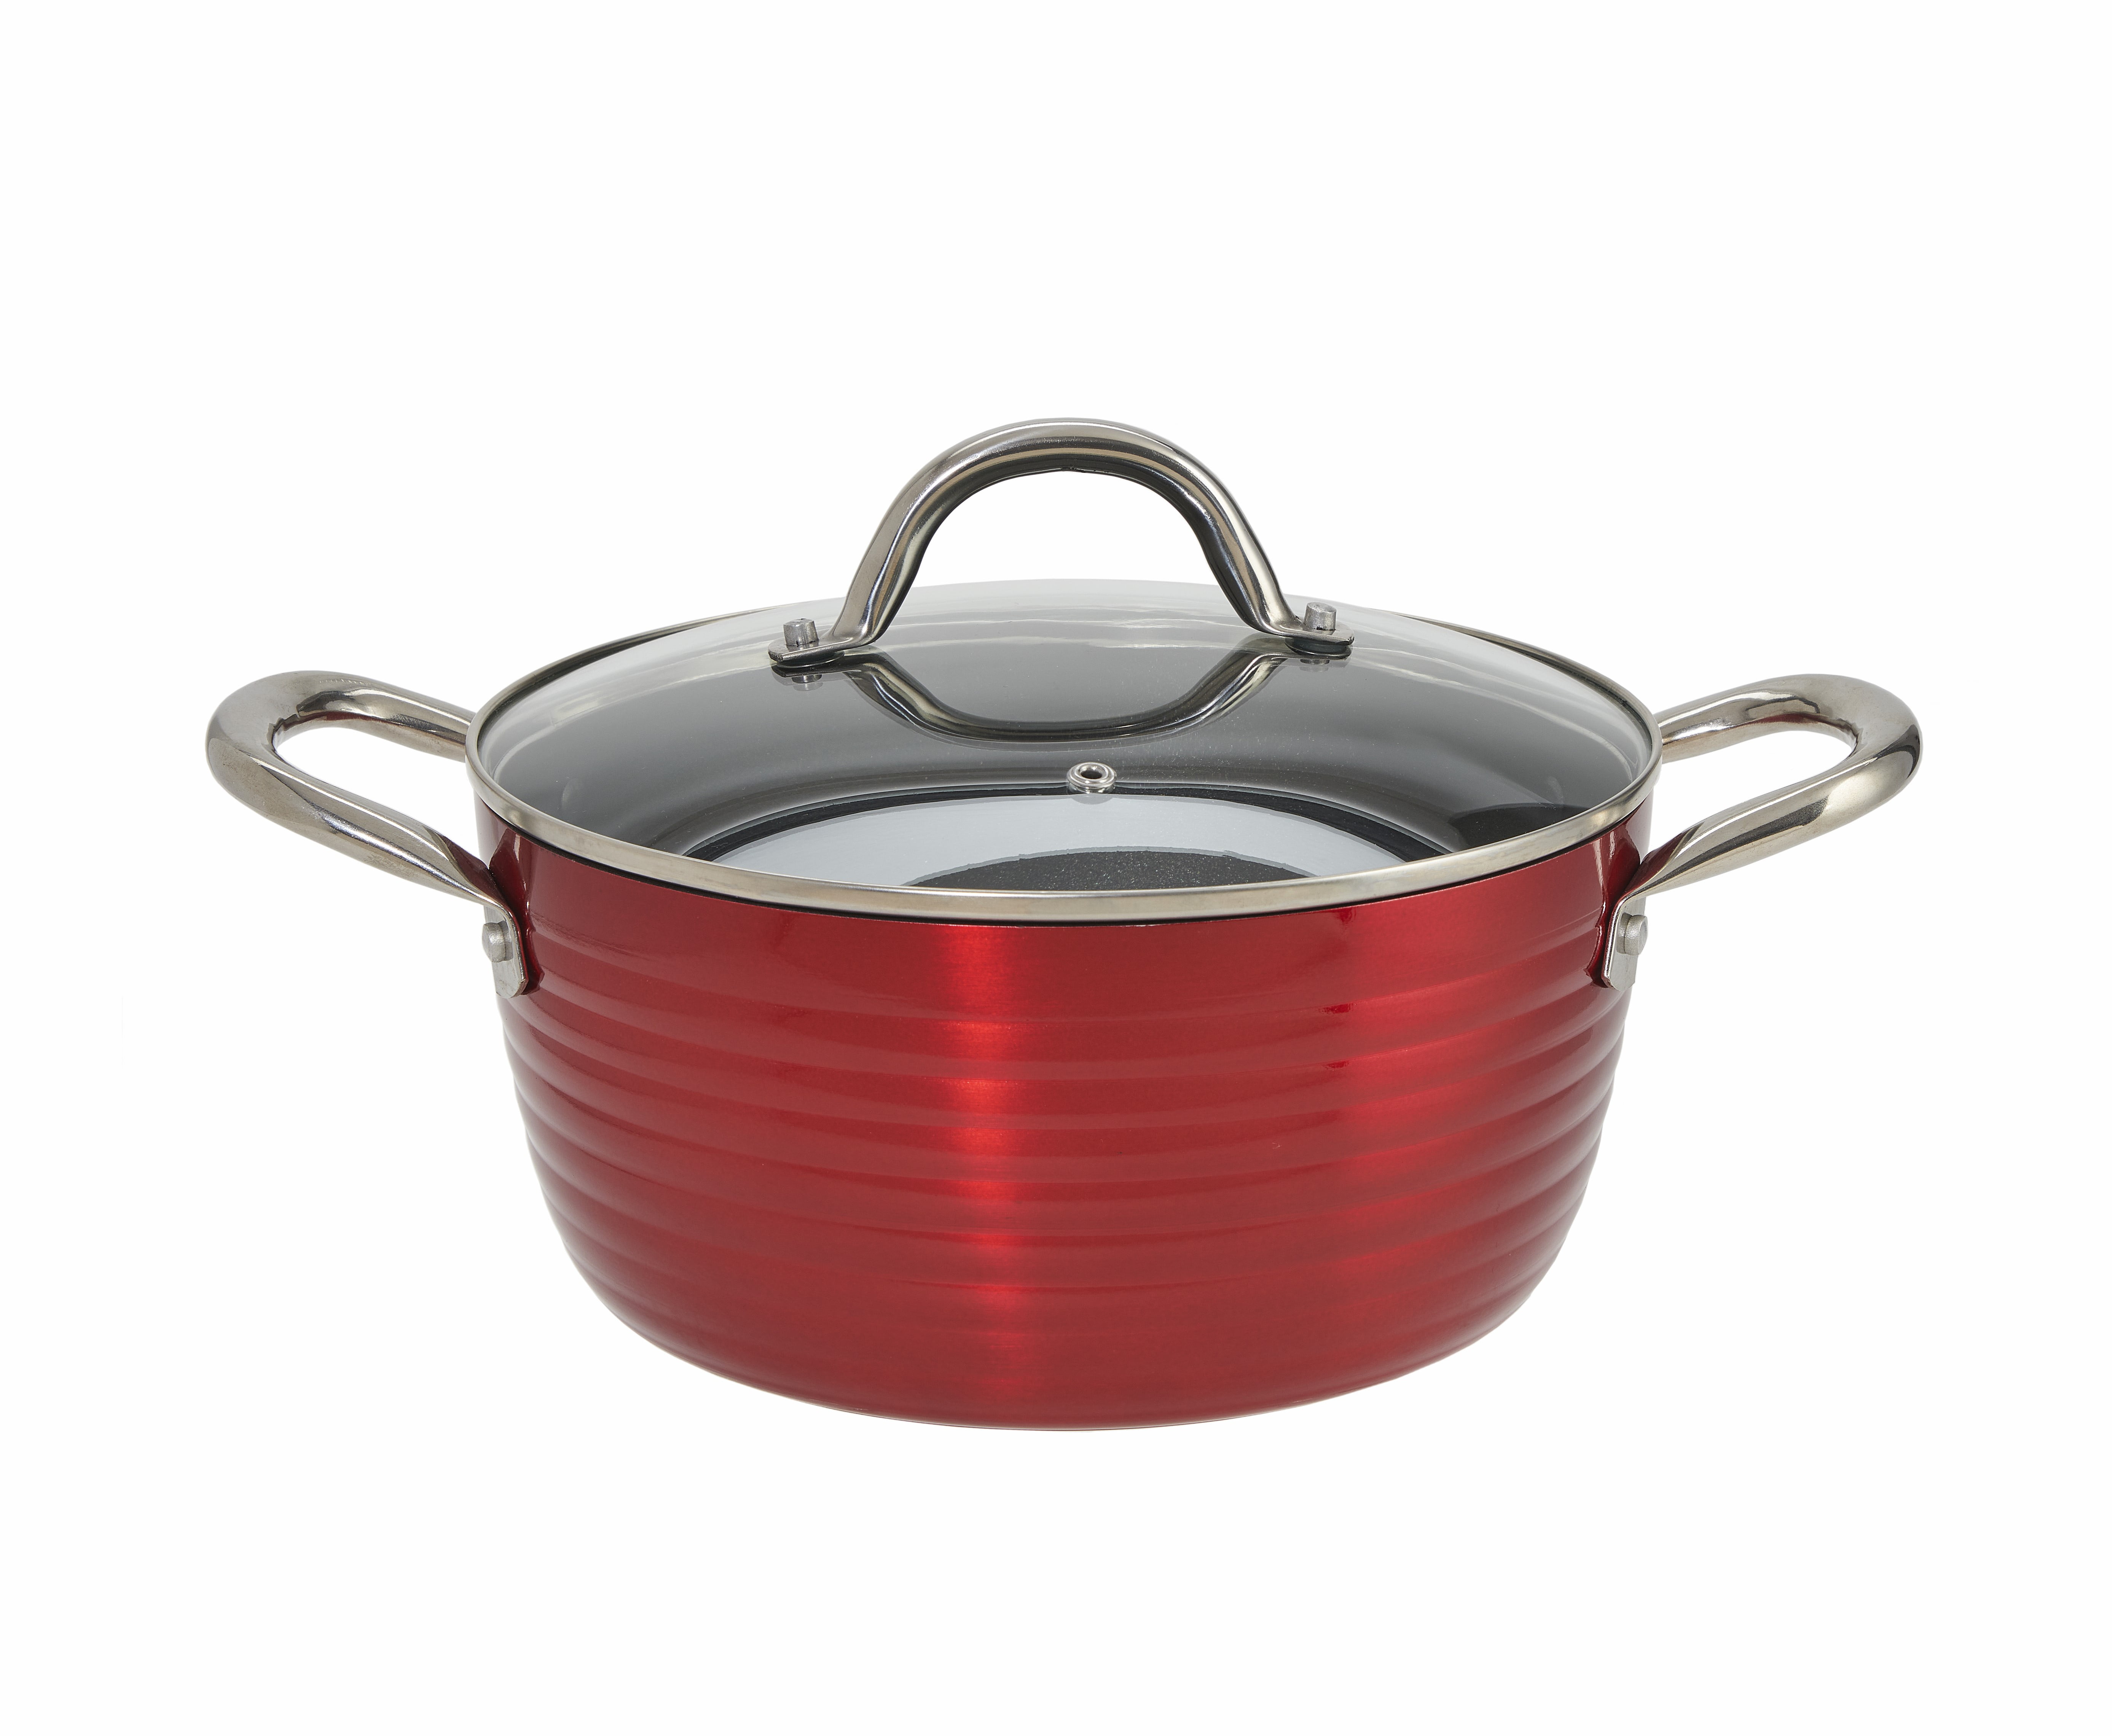 Hawsaiy 4.5 QT Enameled Dutch Oven Pot with Lid, Cast Iron Dutch Oven with  Dual Handles for Bread Baking, Cooking, Non-stick Enamel Coated Cookware 